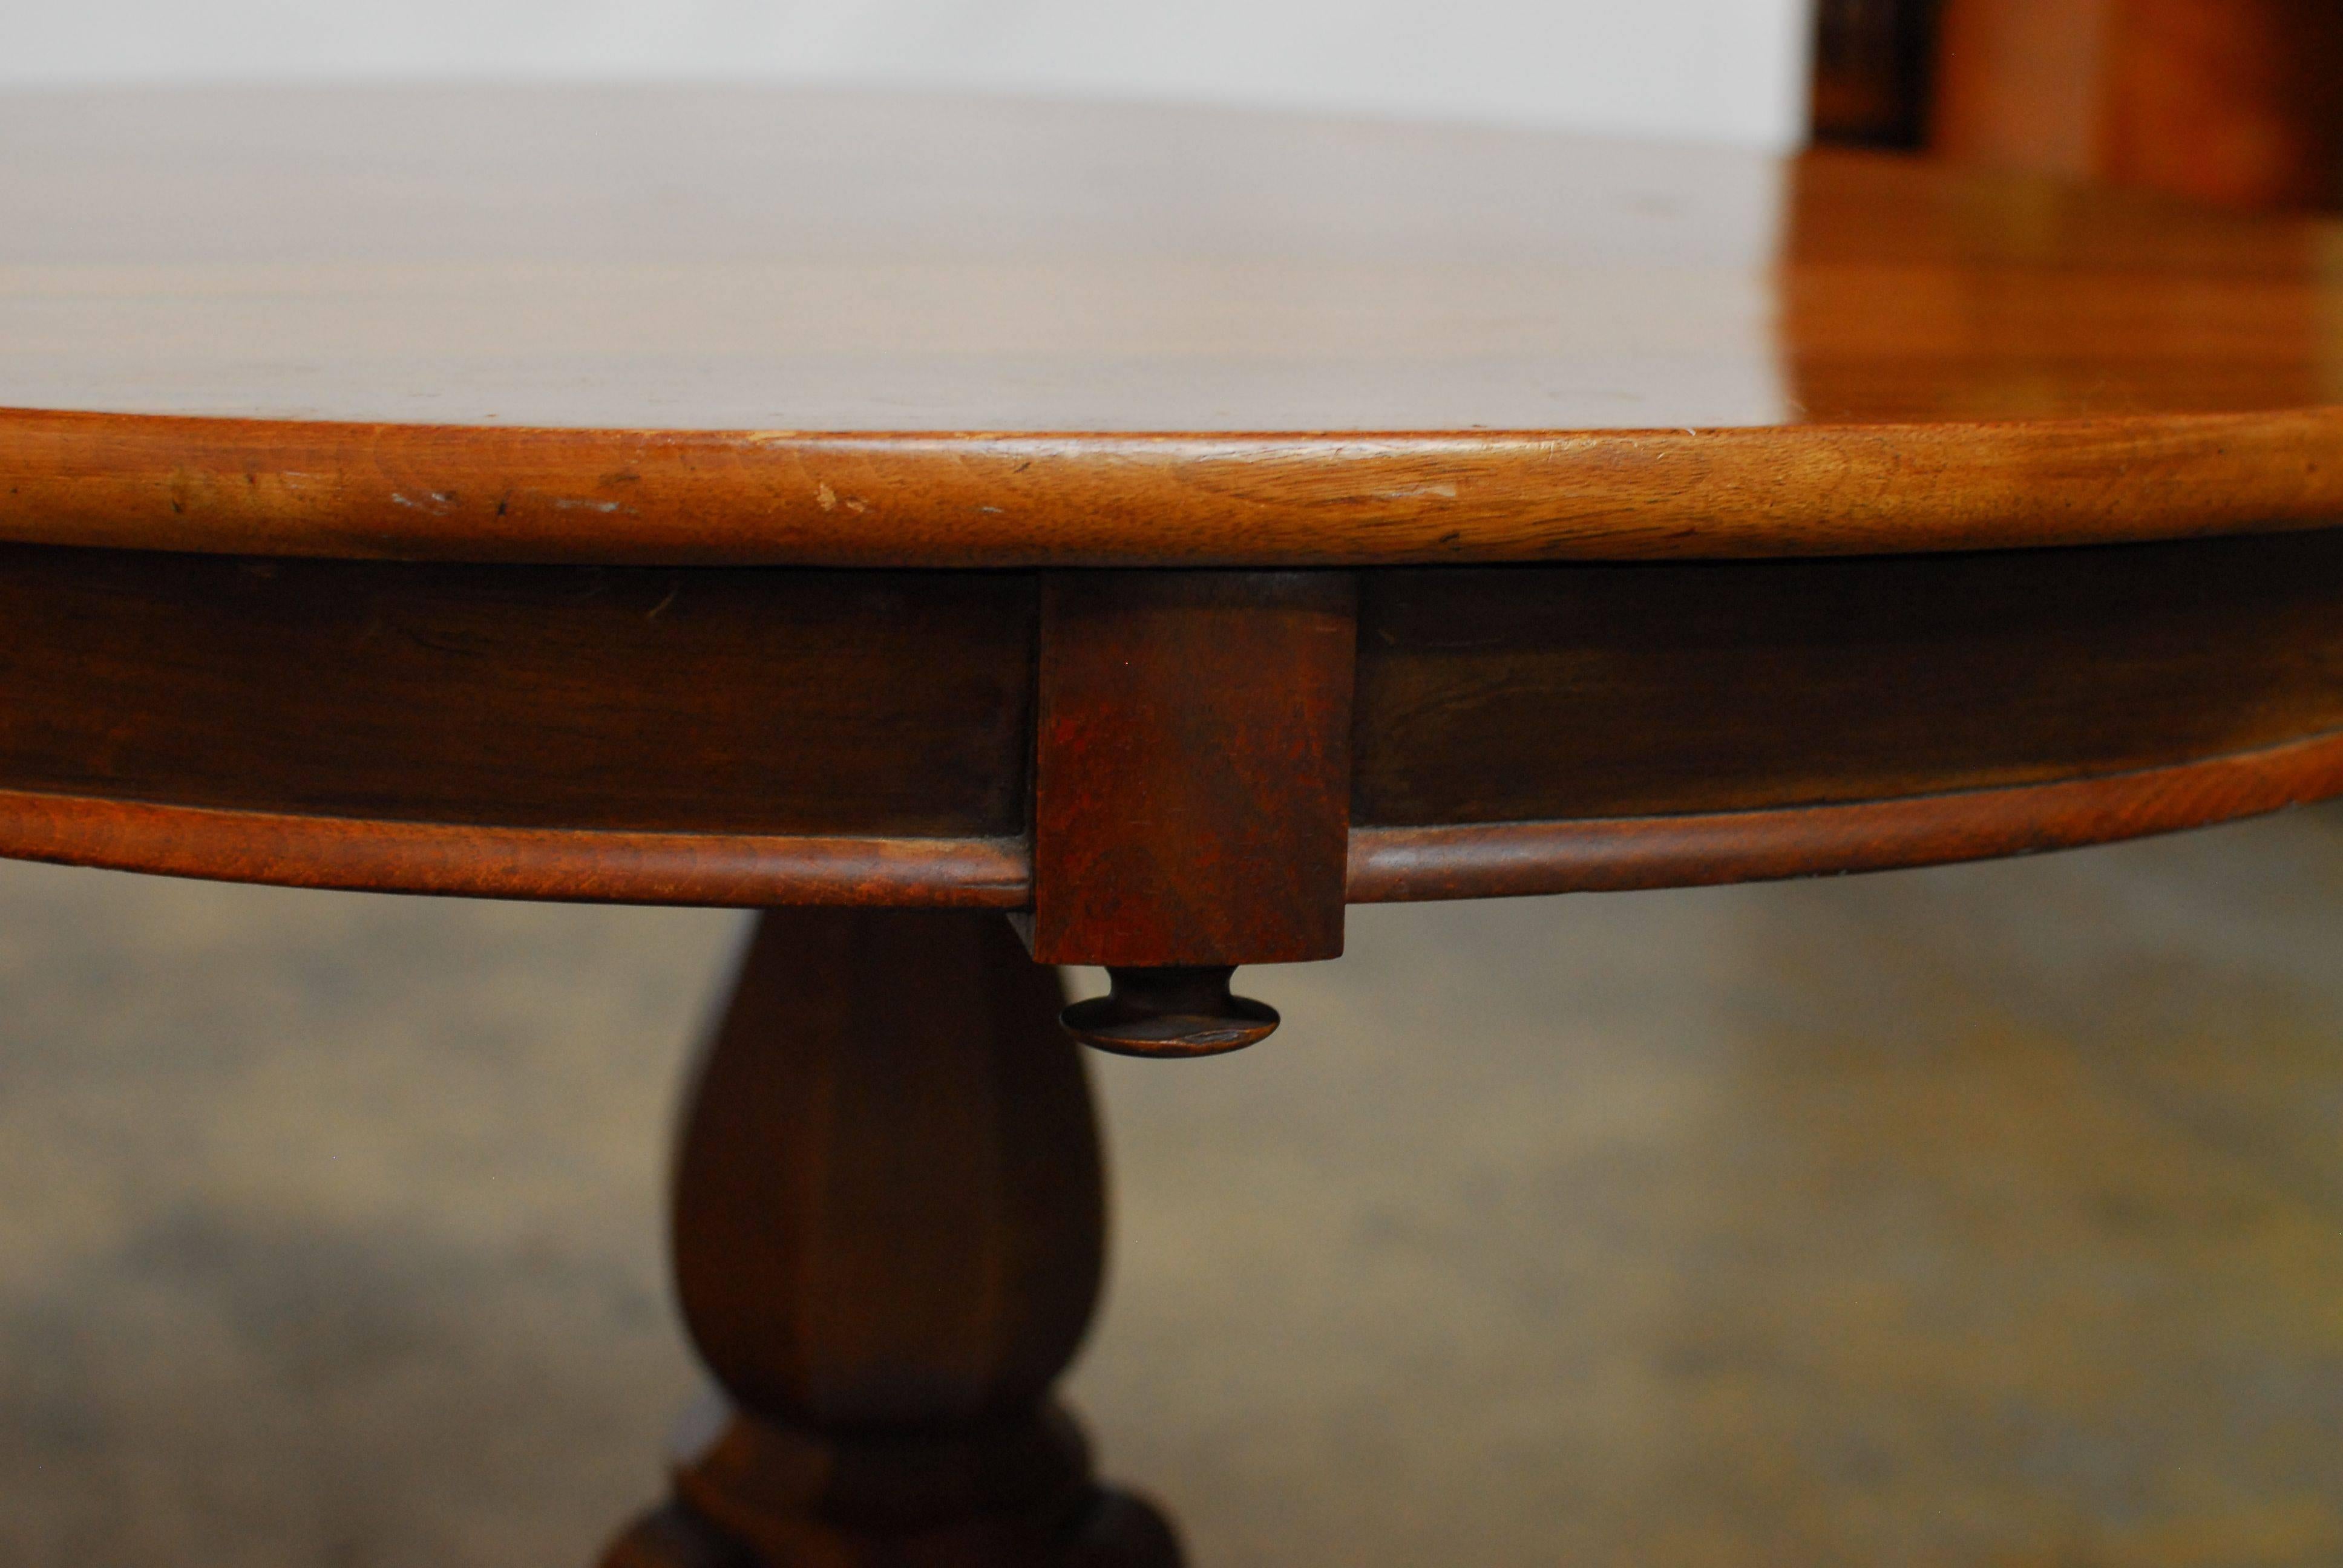 Round 19th century pedestal style breakfast table carved from walnut and sitting on a tripod base. Unique table with an octagonal pedestal base and carved apron with decorative round knobs.